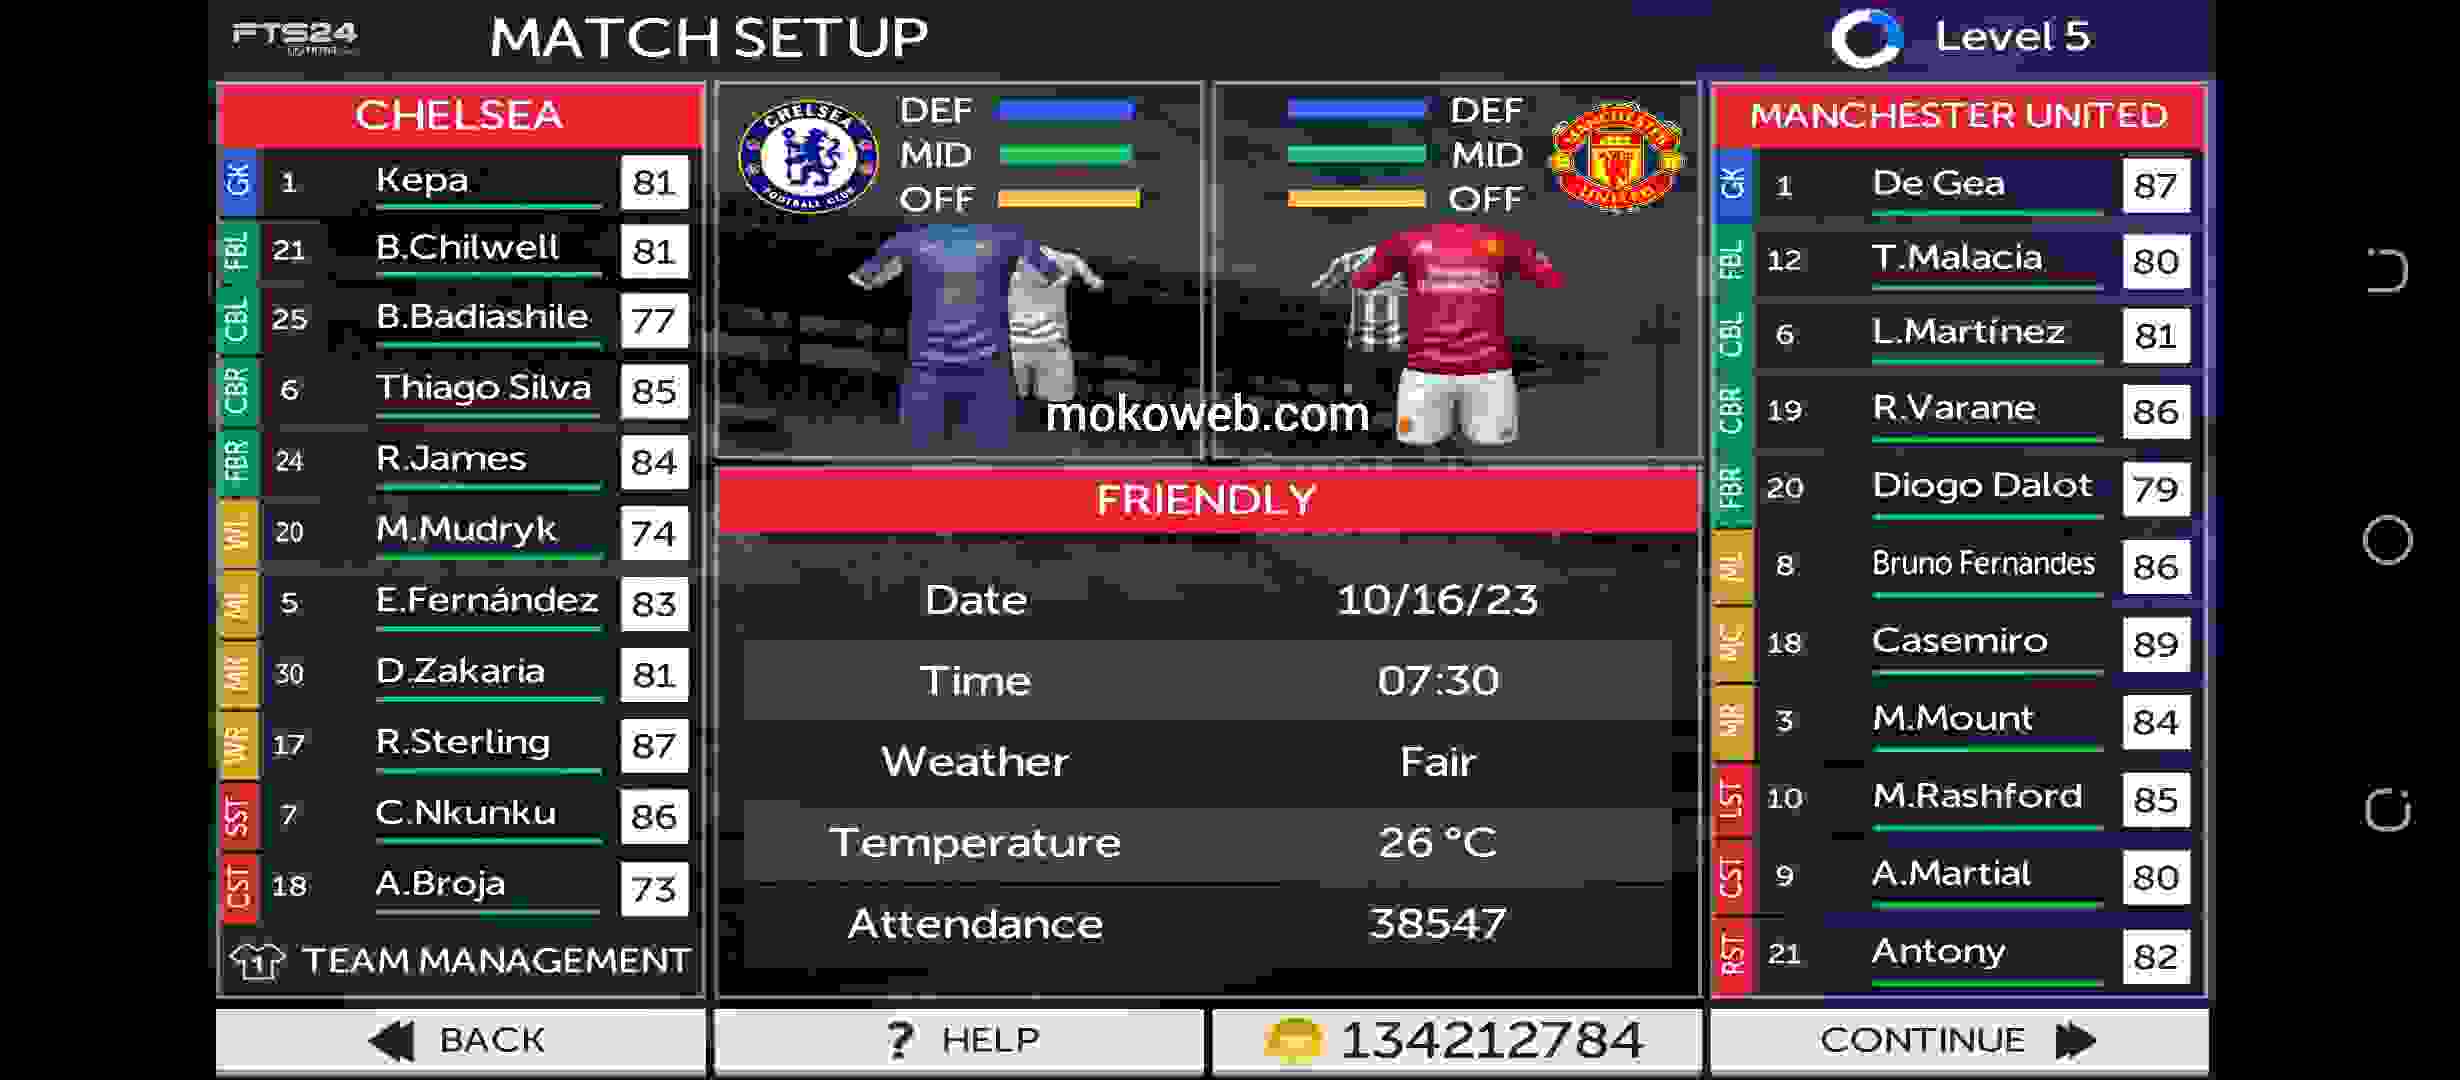 FTS 24 MOBILE™ MOD EA SPORTS FC 24 Android Offline New Update 2024 & Full  Transfers Best Graphics 4K 